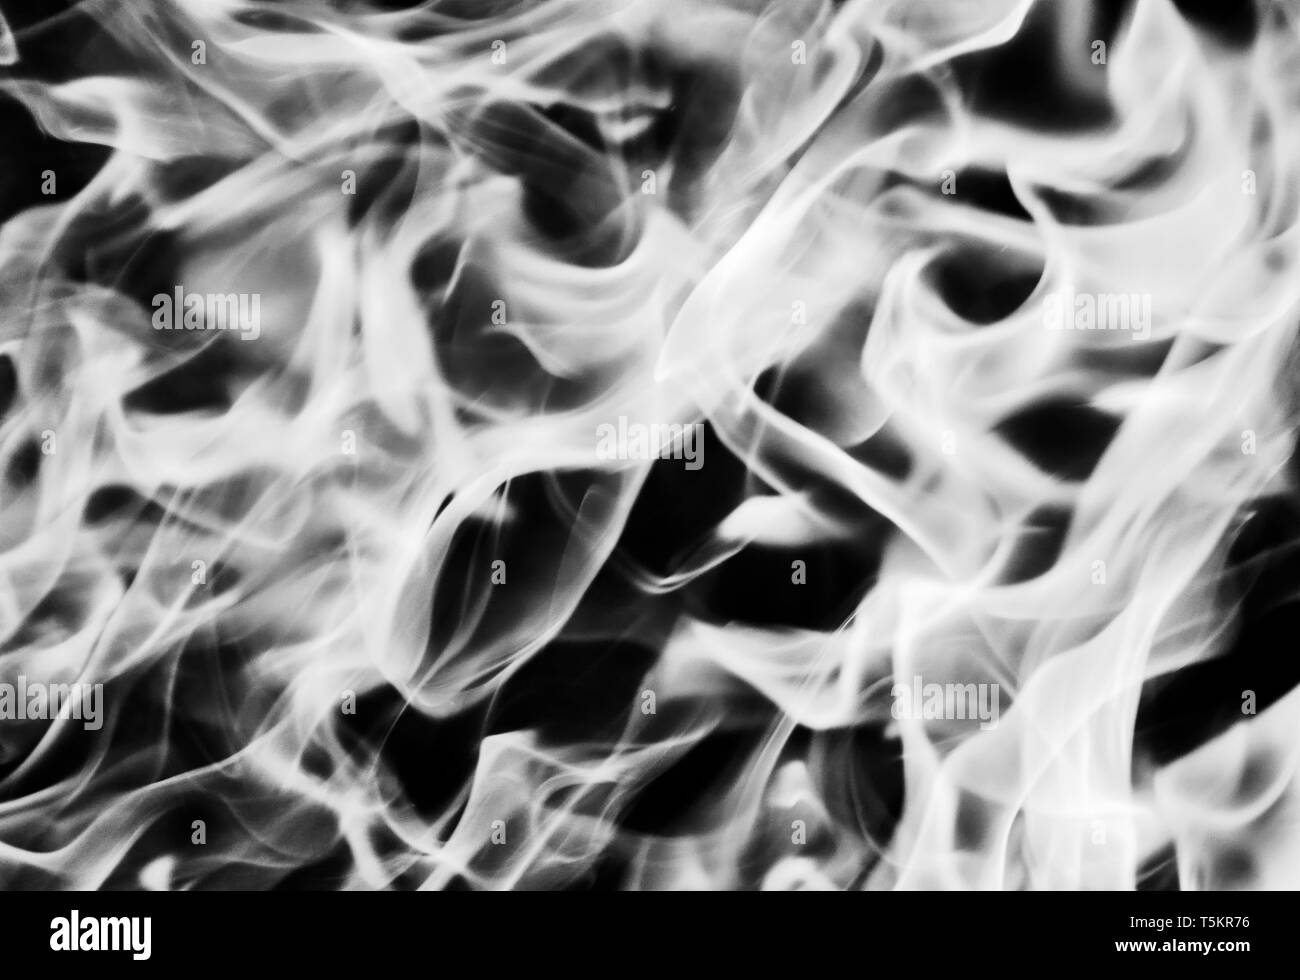 Fire. Wood burning in the fire. Orange flame. Tongue of flame..black and white image. Stock Photo